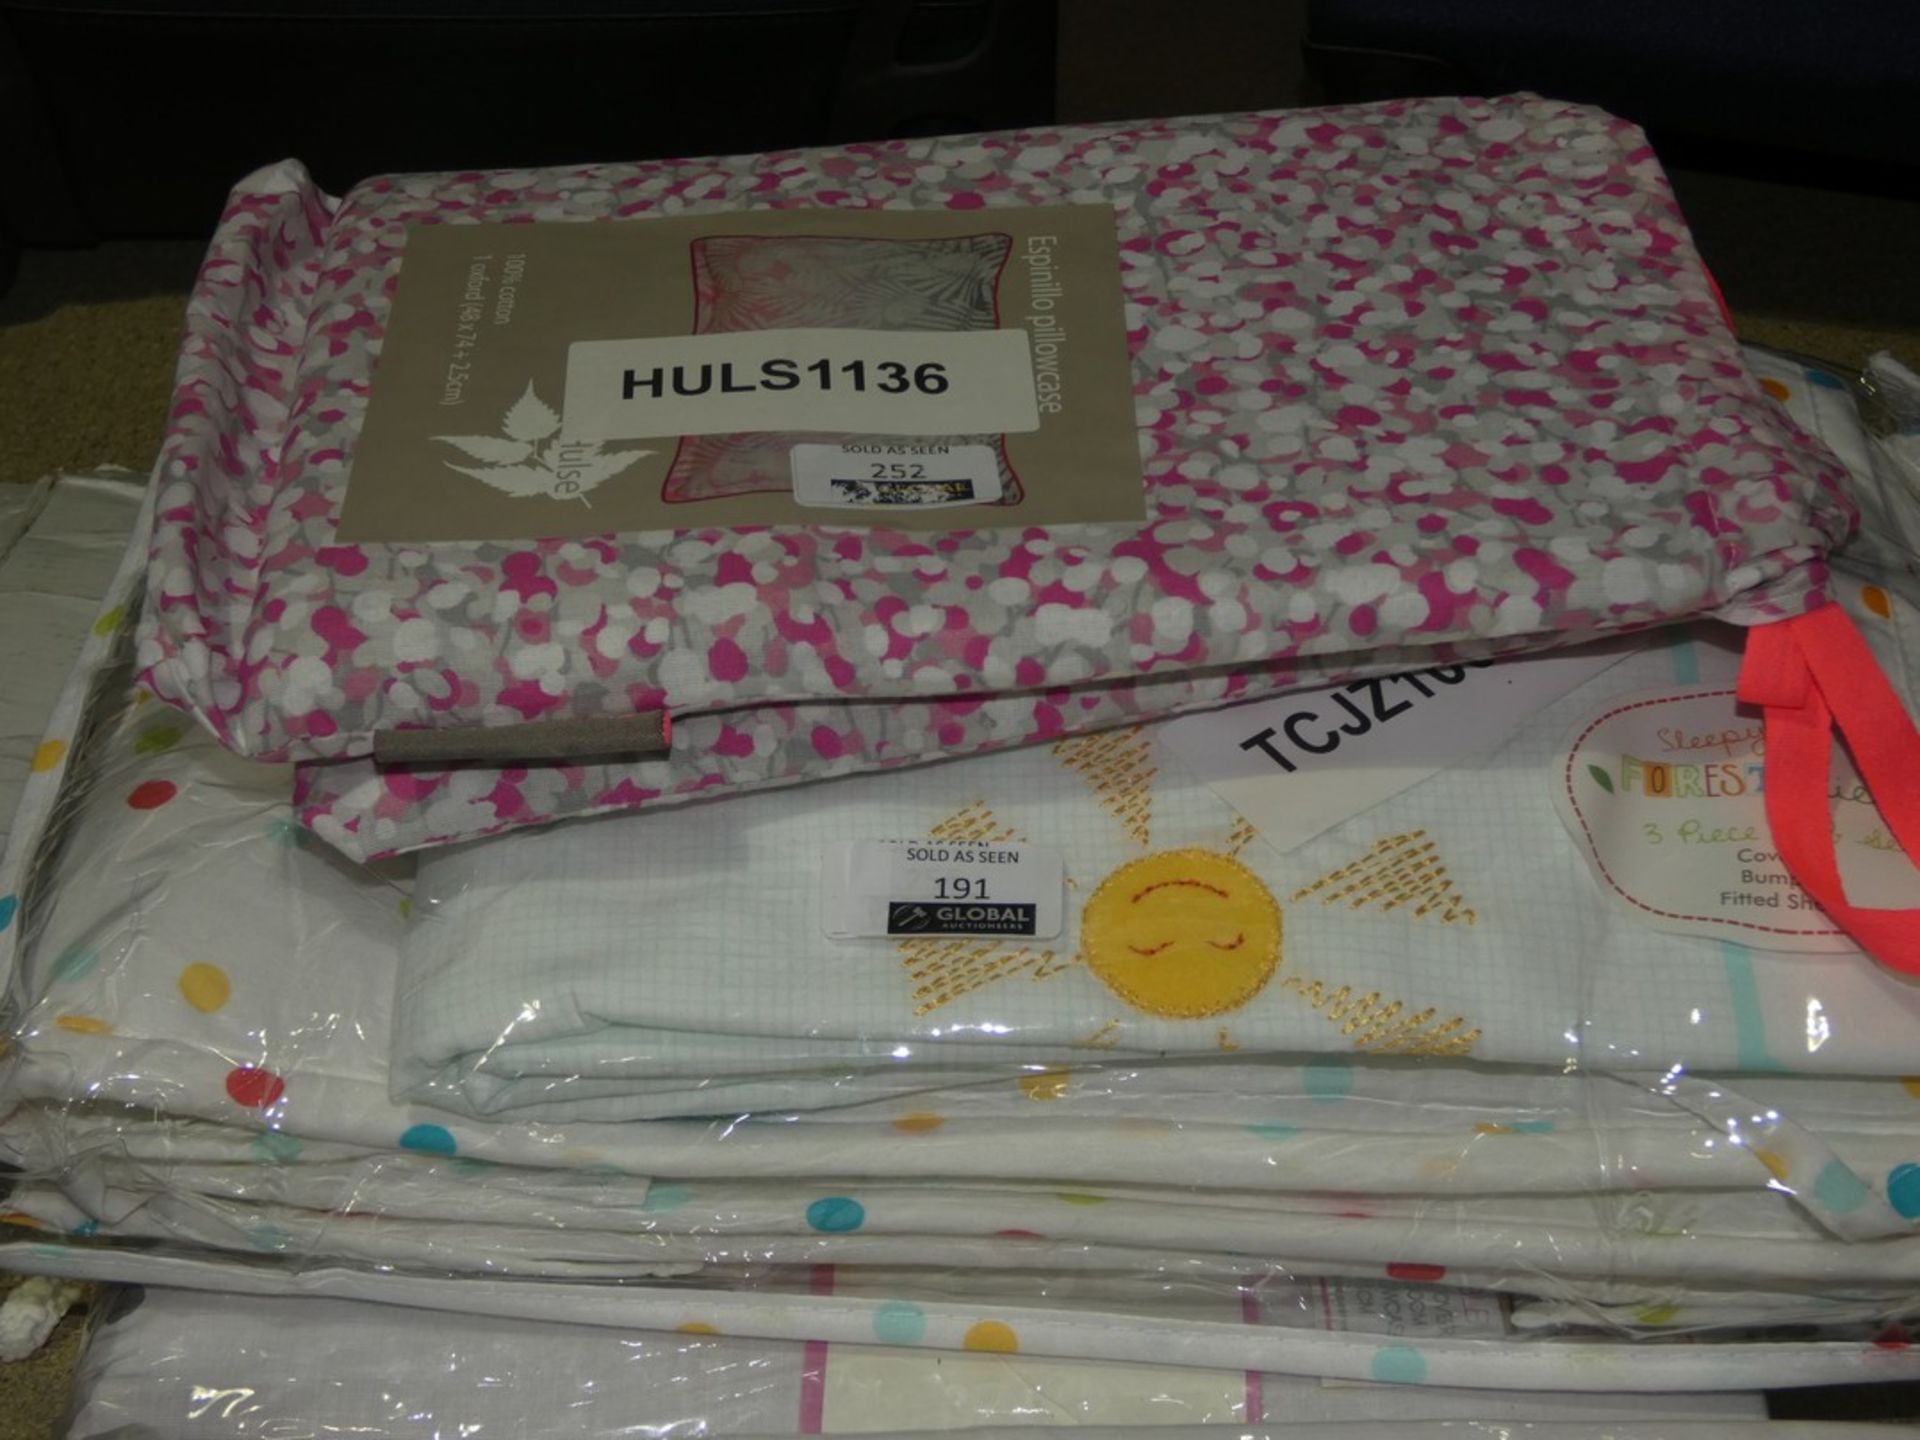 Assorted Brand New Bedding Items to Include Clarrissa Espinillo Pillowcases, Sleepy Forest Friends